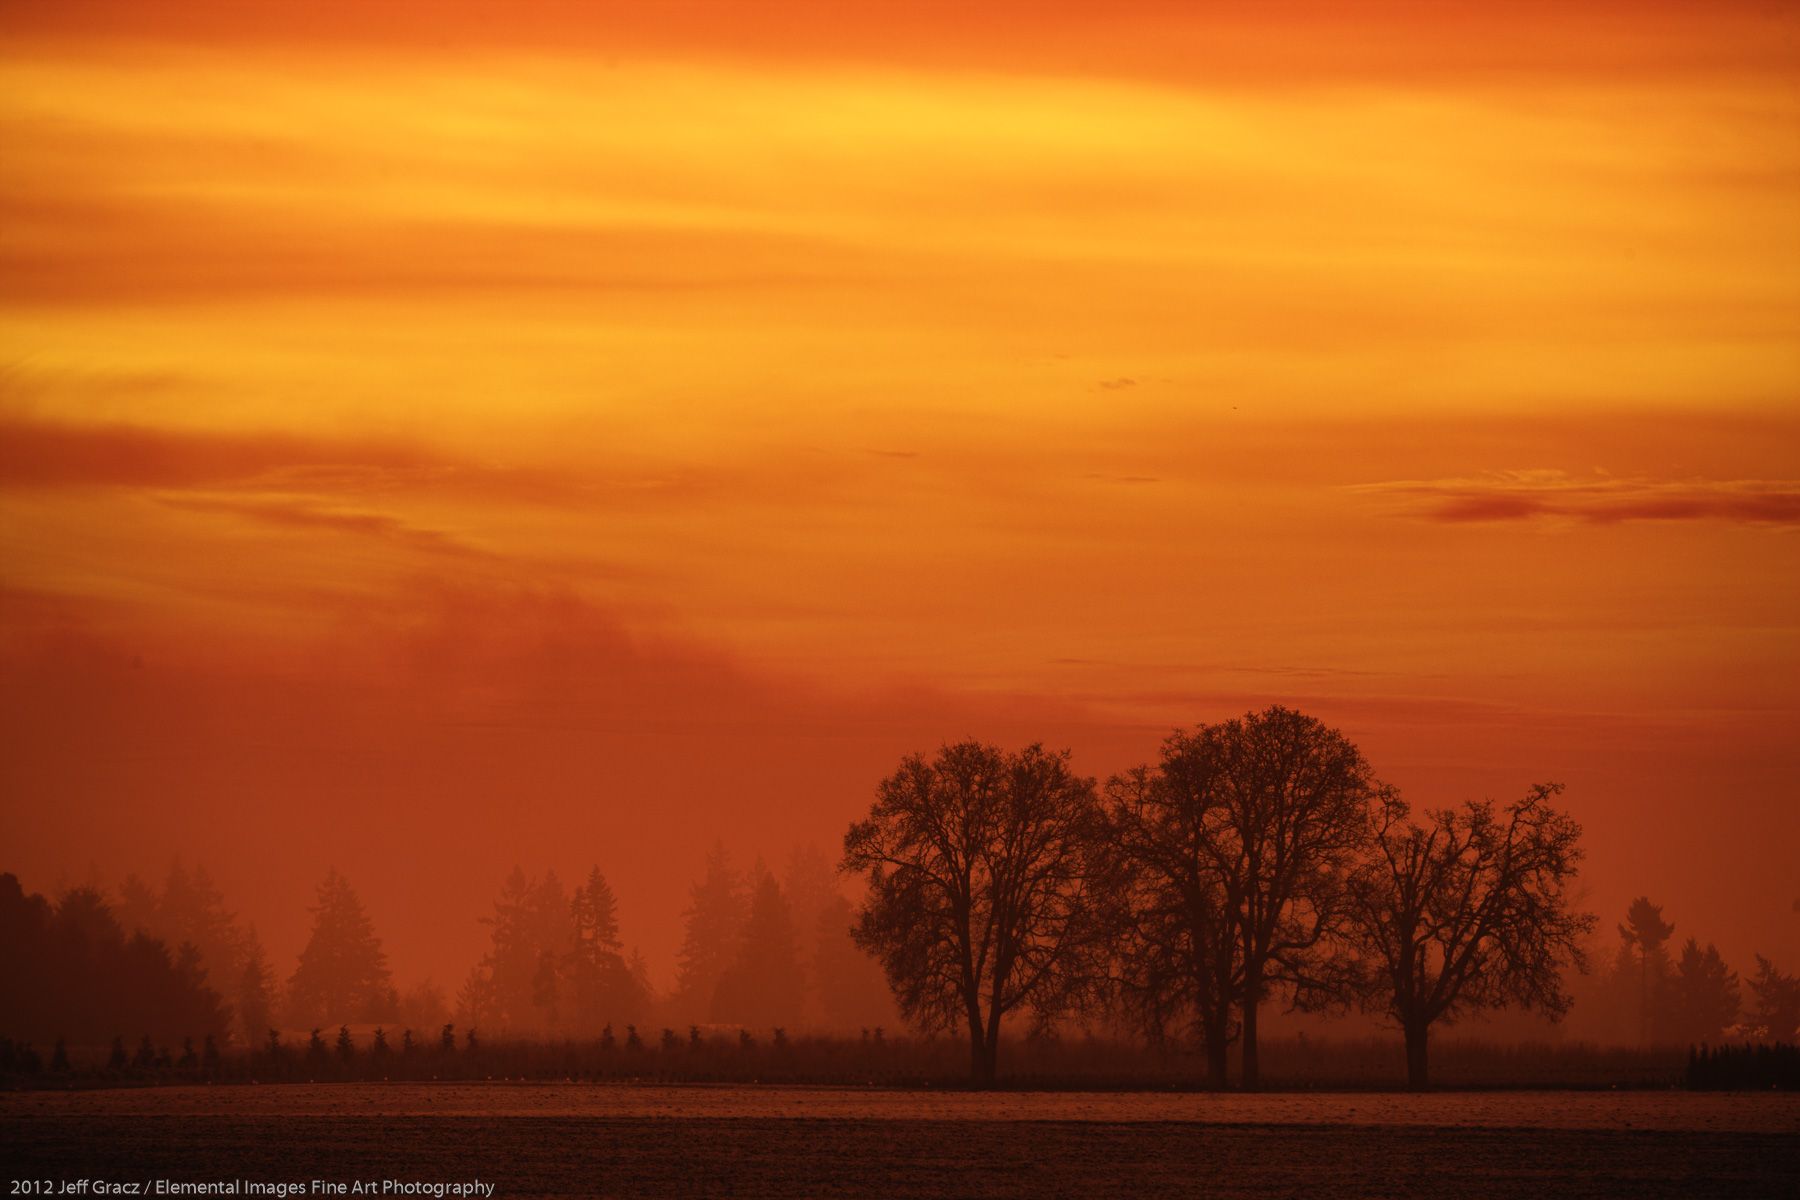 Fog, Sunrise, Willamette Valley | Butteville | OR | USA - © 2012 Jeff Gracz / Elemental Images Fine Art Photography - All Rights Reserved Worldwide